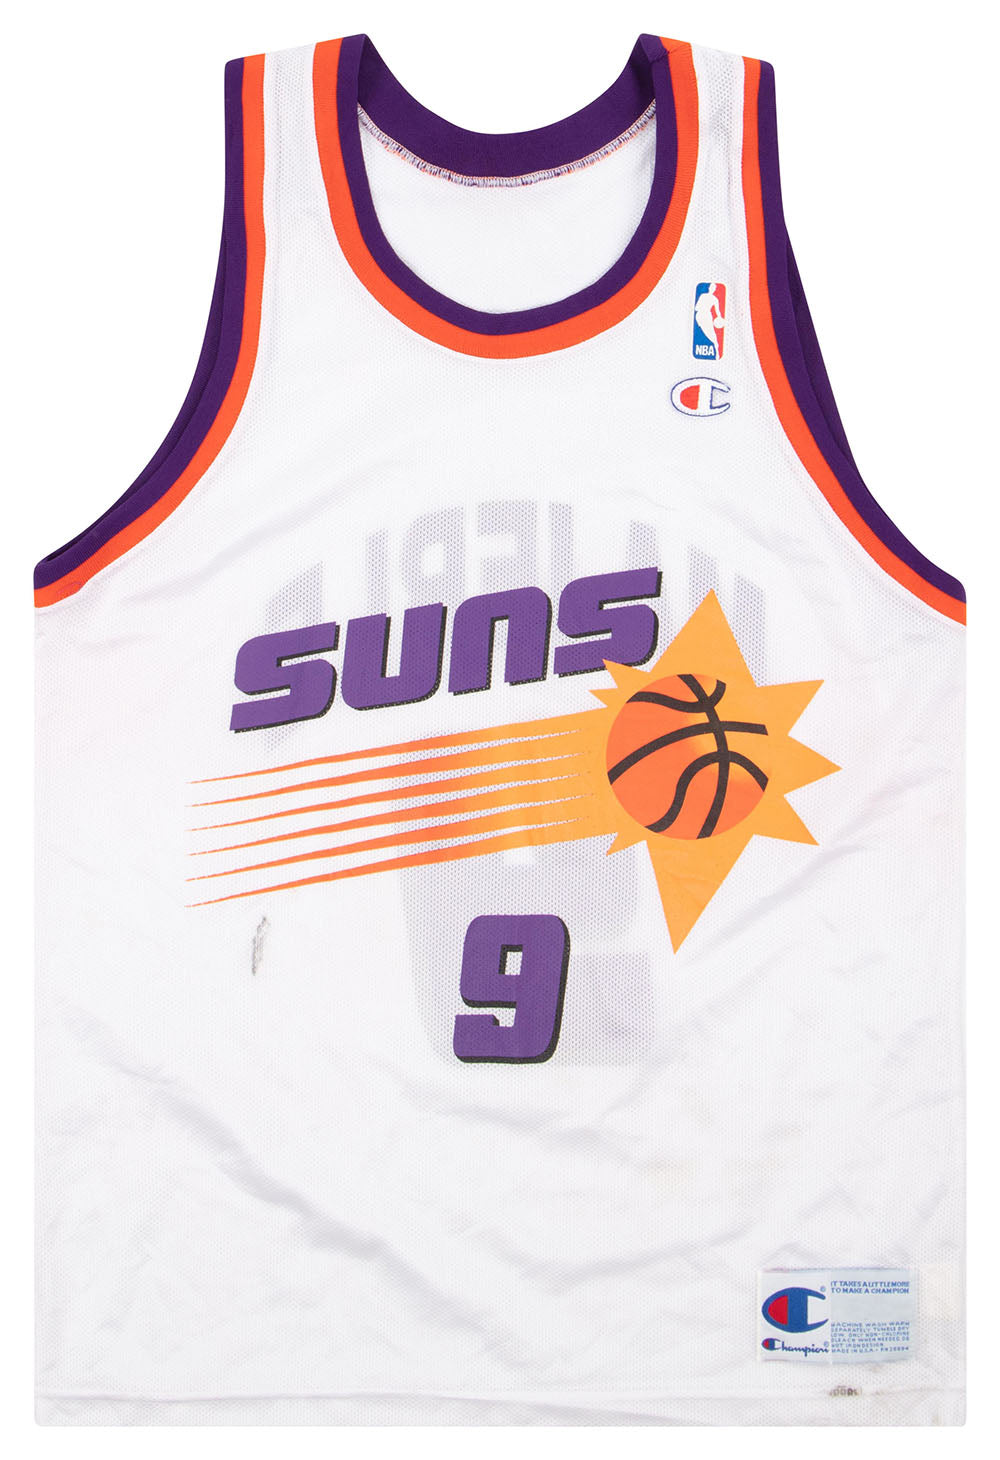 What If The Phoenix Suns Would Release Retro Jerseys?